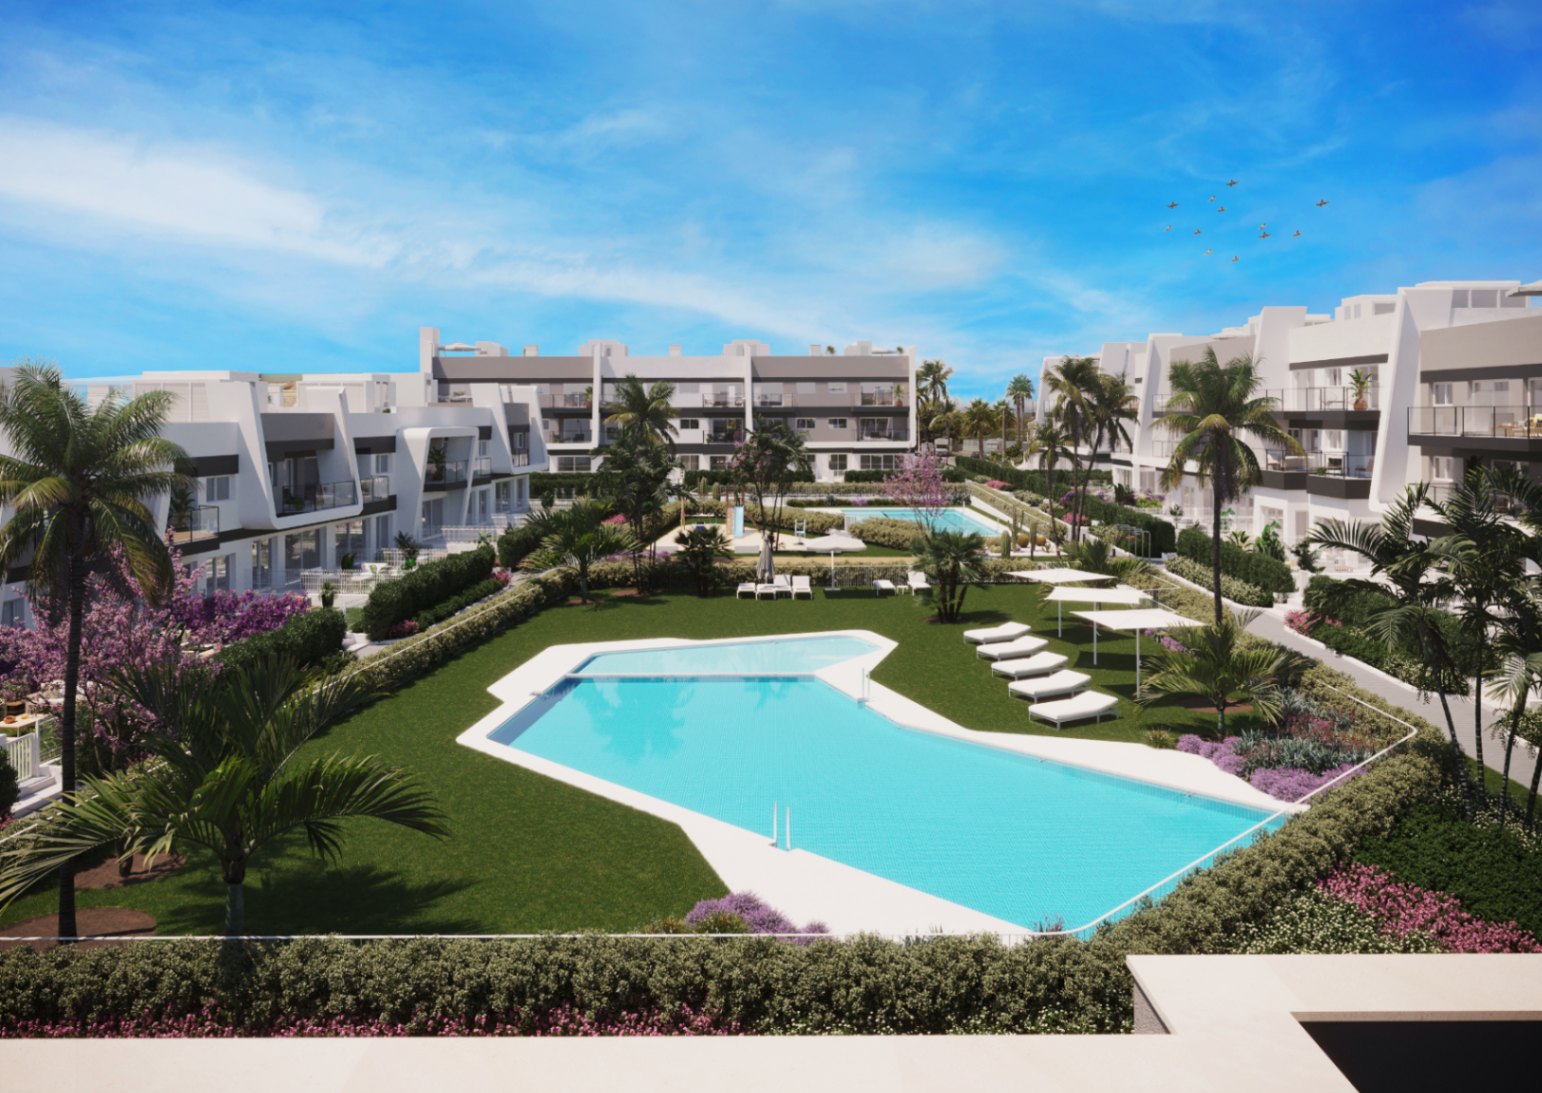 New appartments with pool, 2 - 3 bedrooms, Santa Pola Alicante